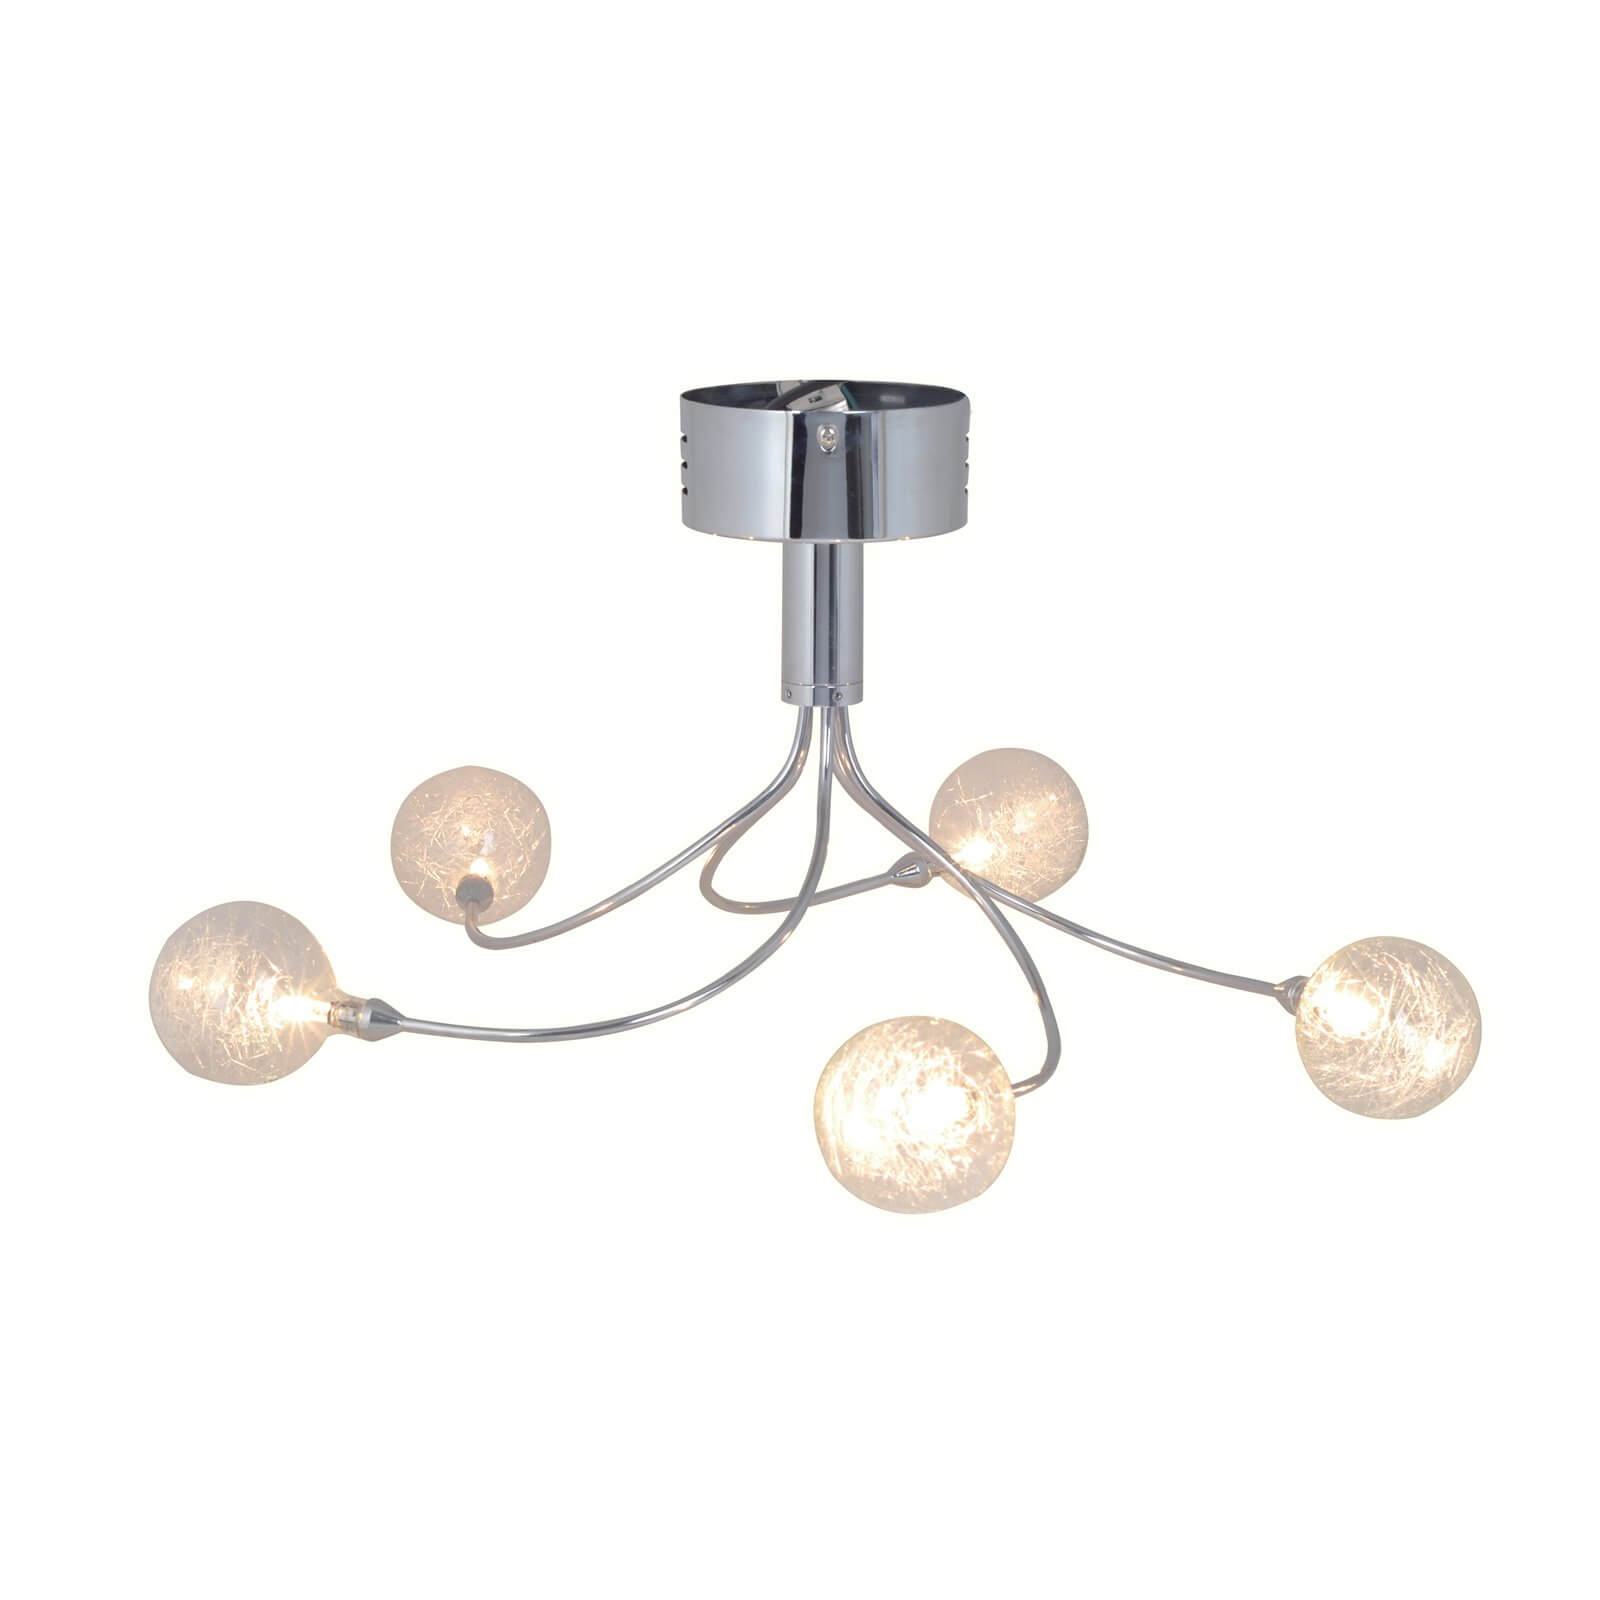 Photo of Crackle 5 Light Fitting - Chrome